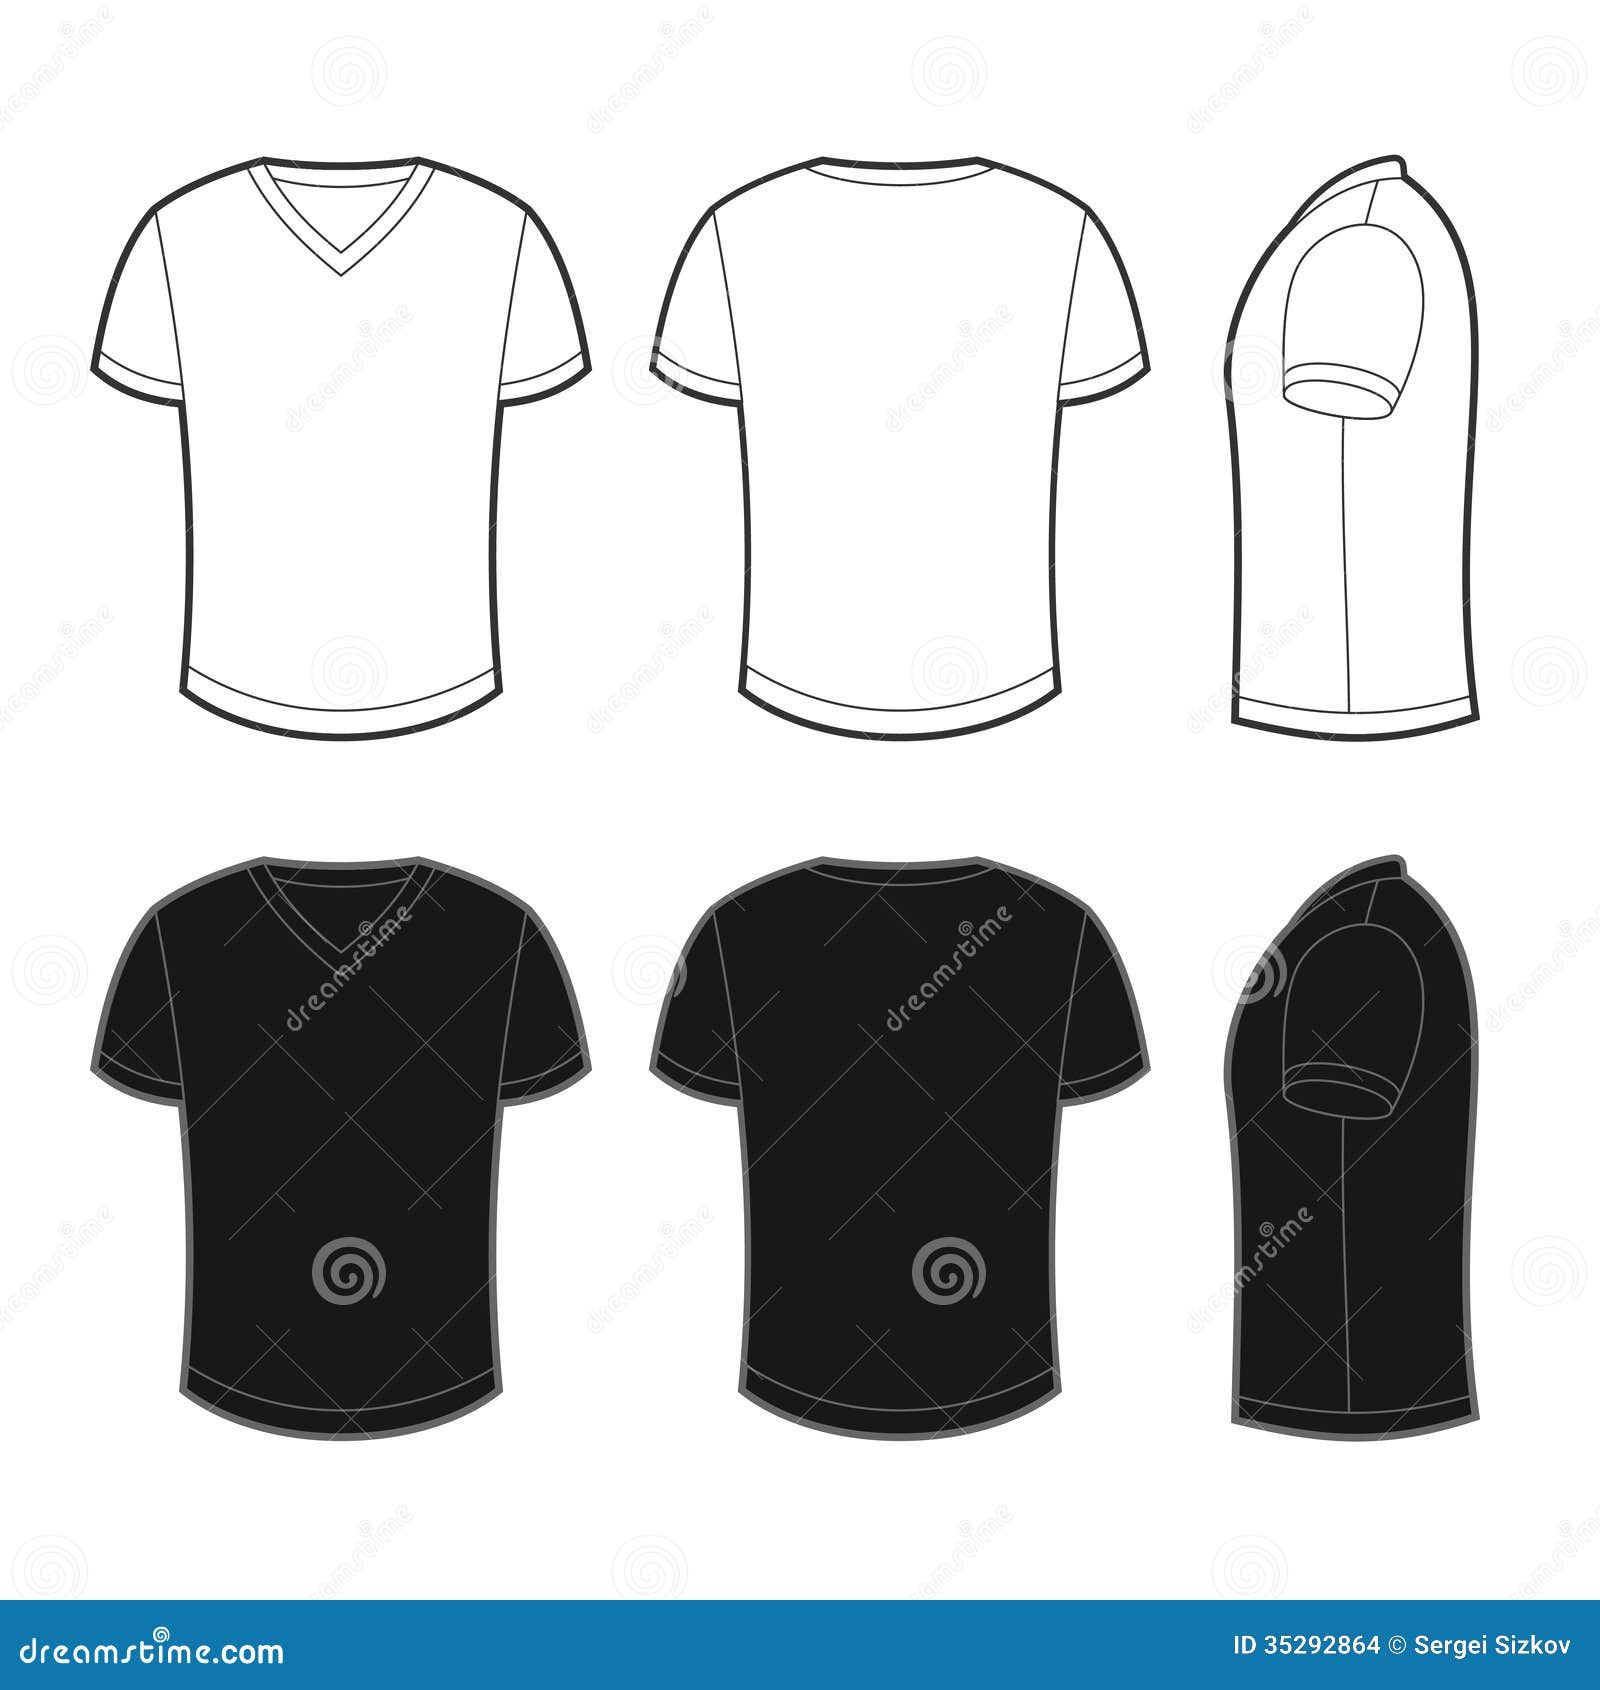 Front, Back And Side Views Of Blank T-shirt Stock Images - Image: 35292864